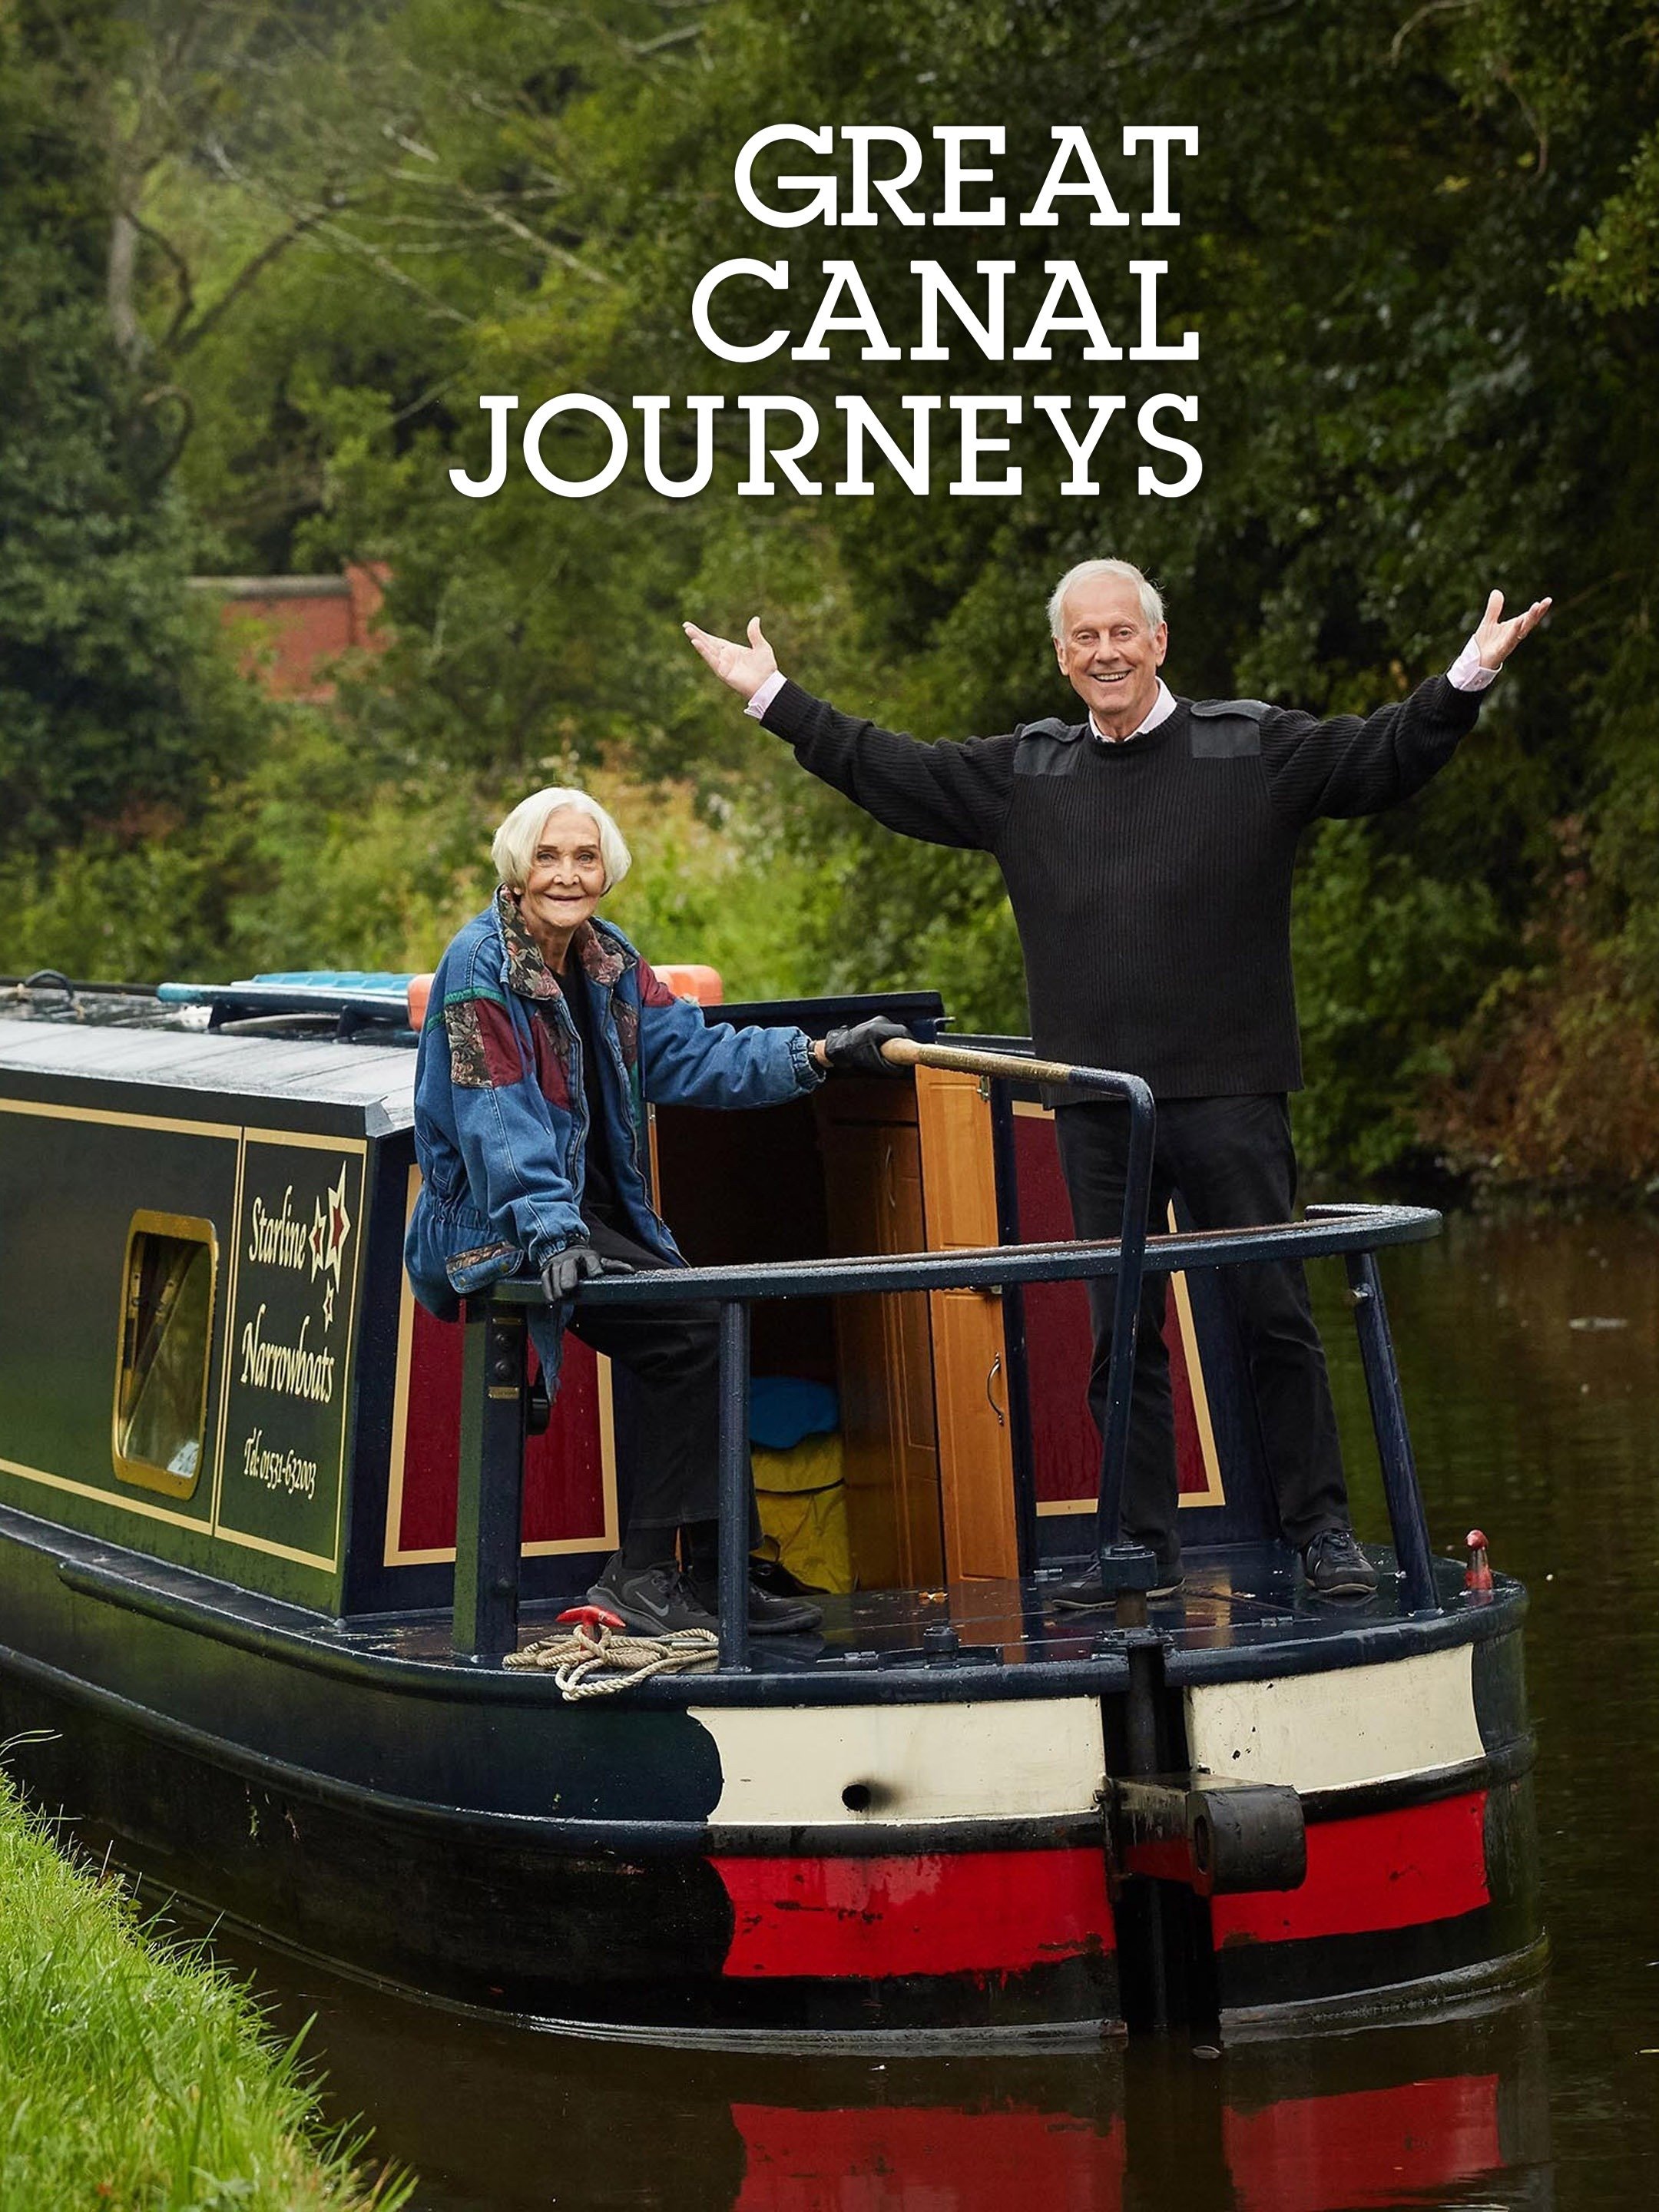 what channel is great canal journeys on